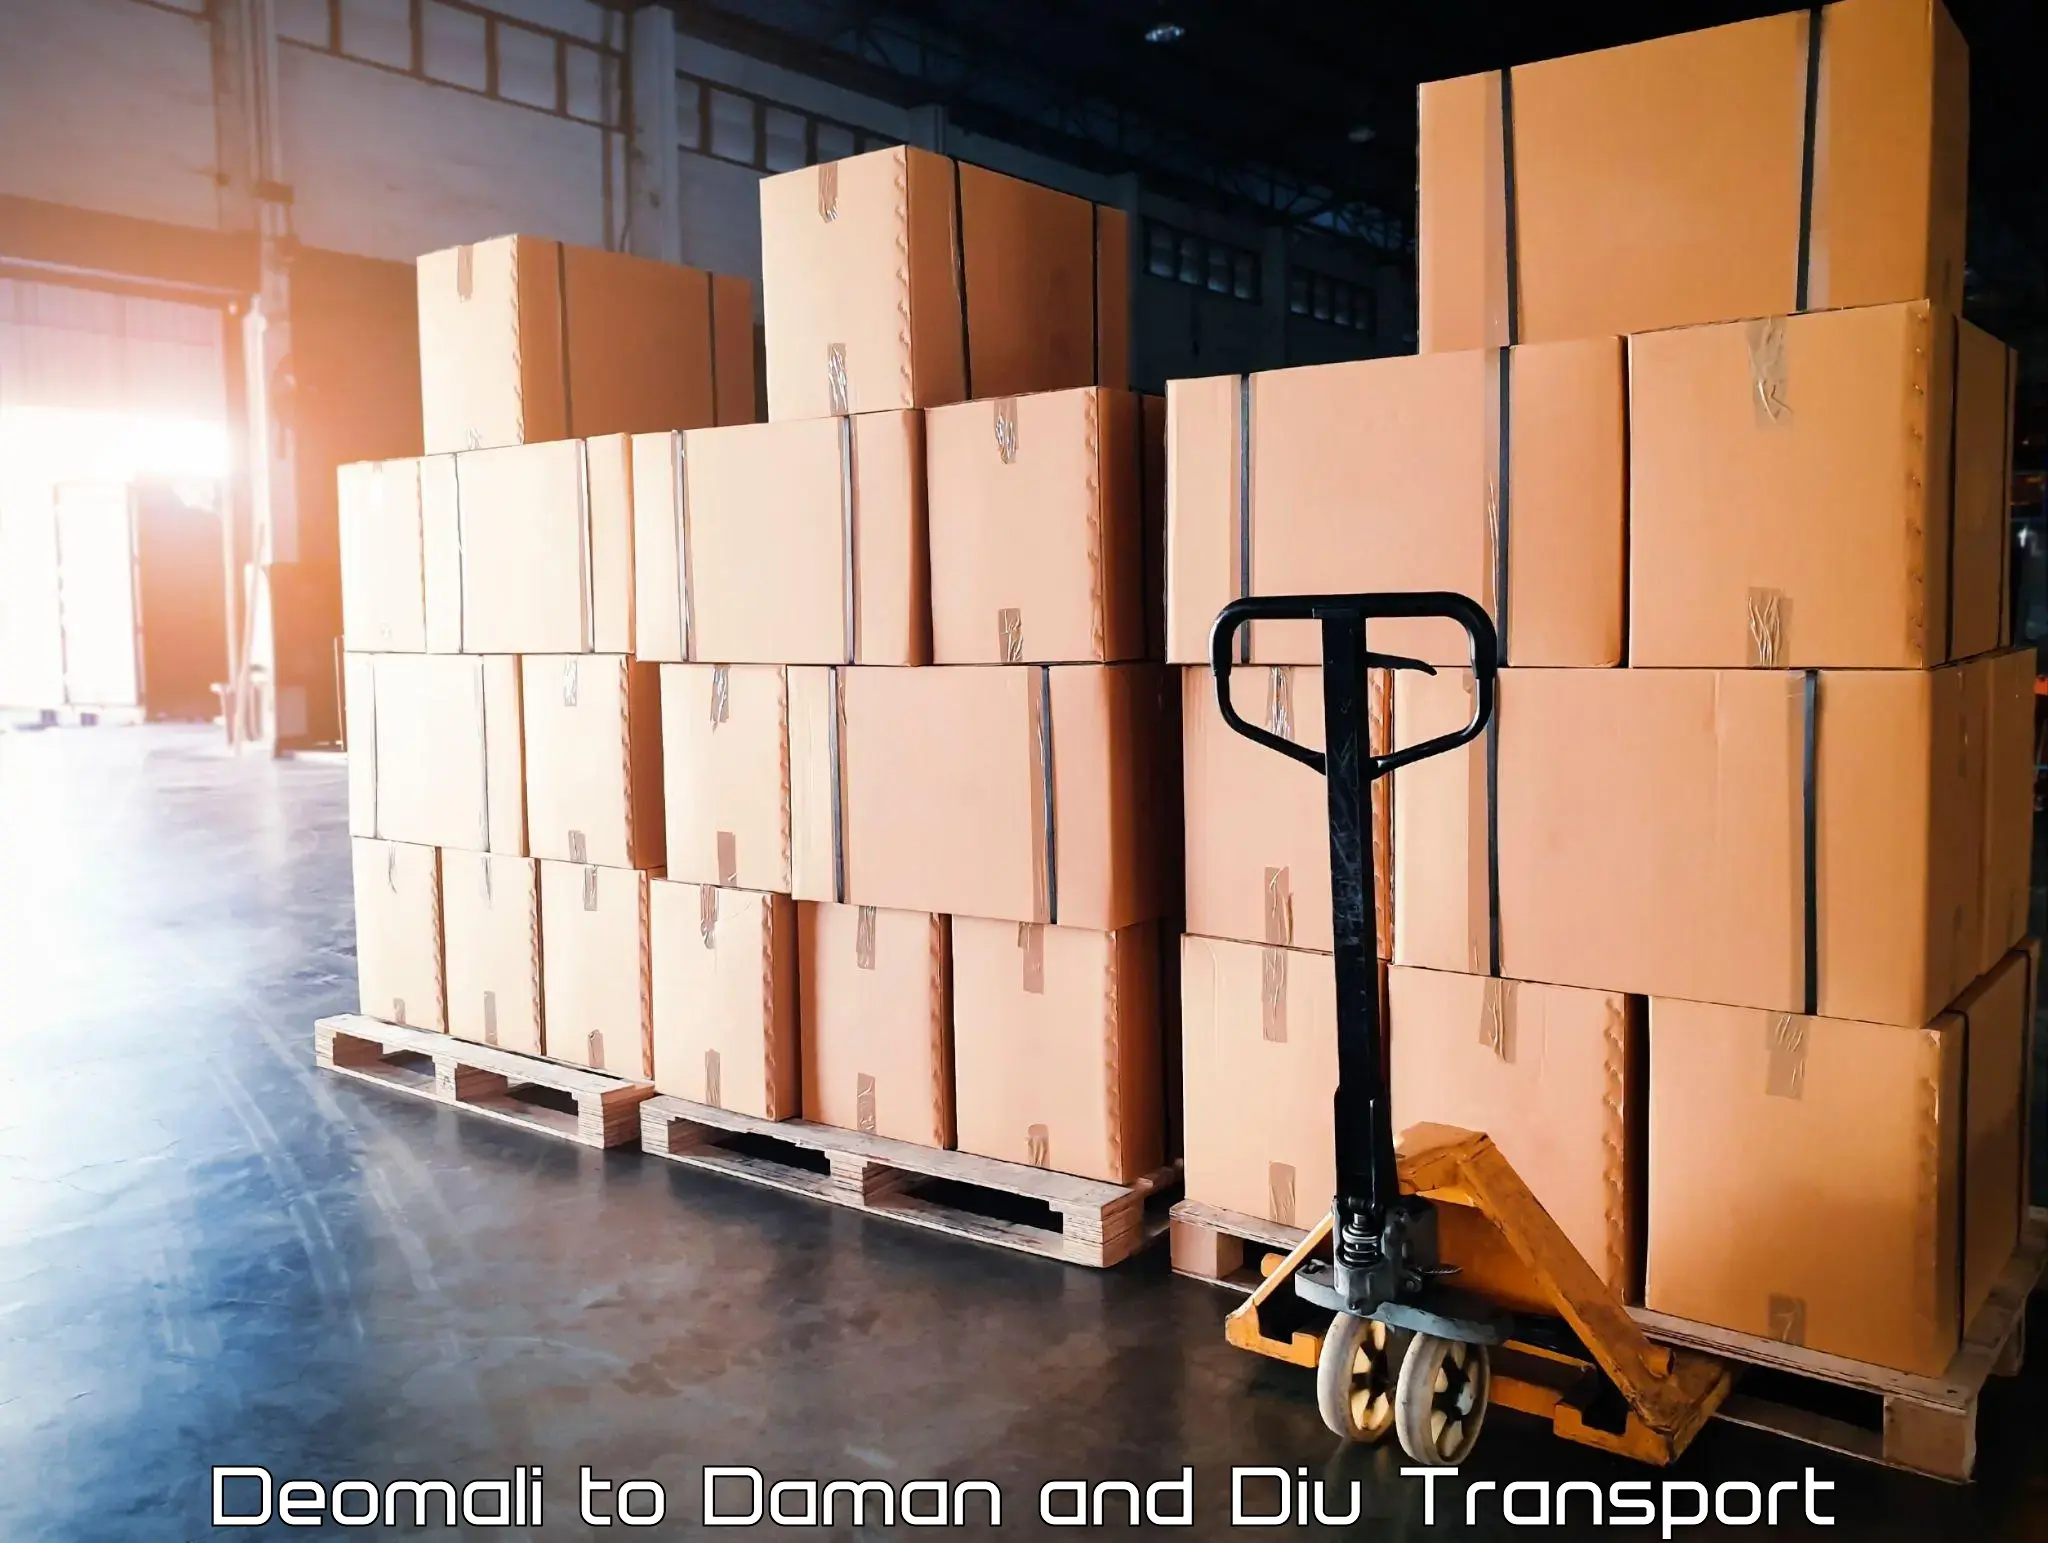 Daily parcel service transport Deomali to Daman and Diu